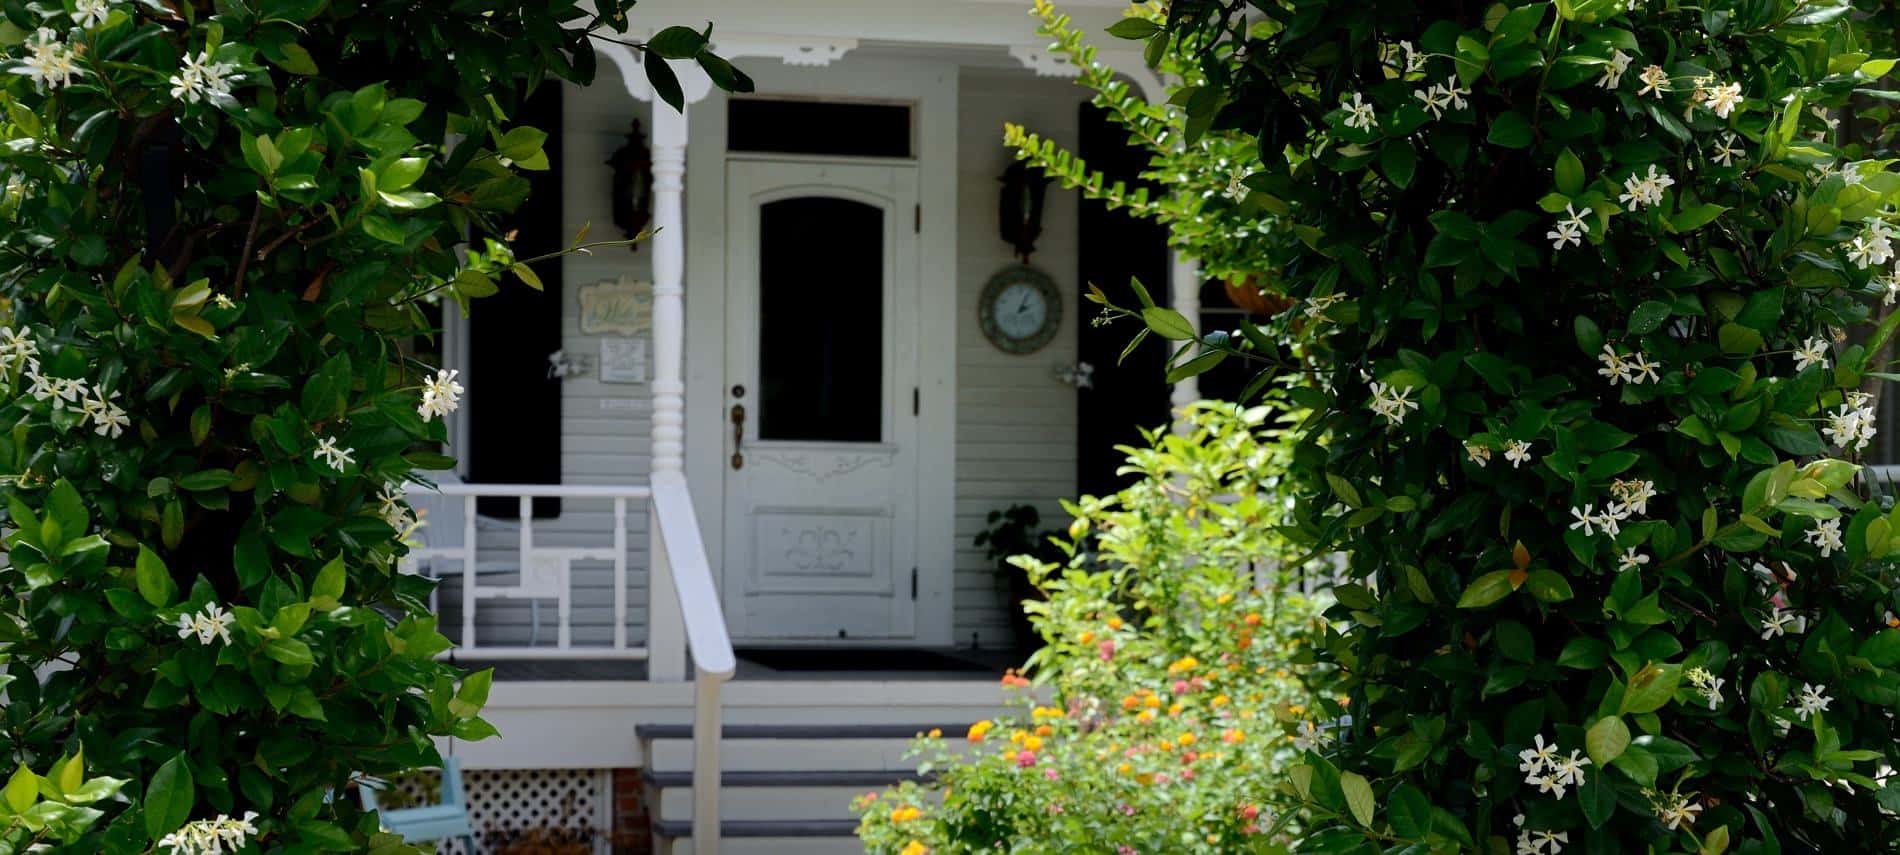 Entrance of Grand Magnolia with steps leading up to covered front porch with white railing and door visible through lush greenery